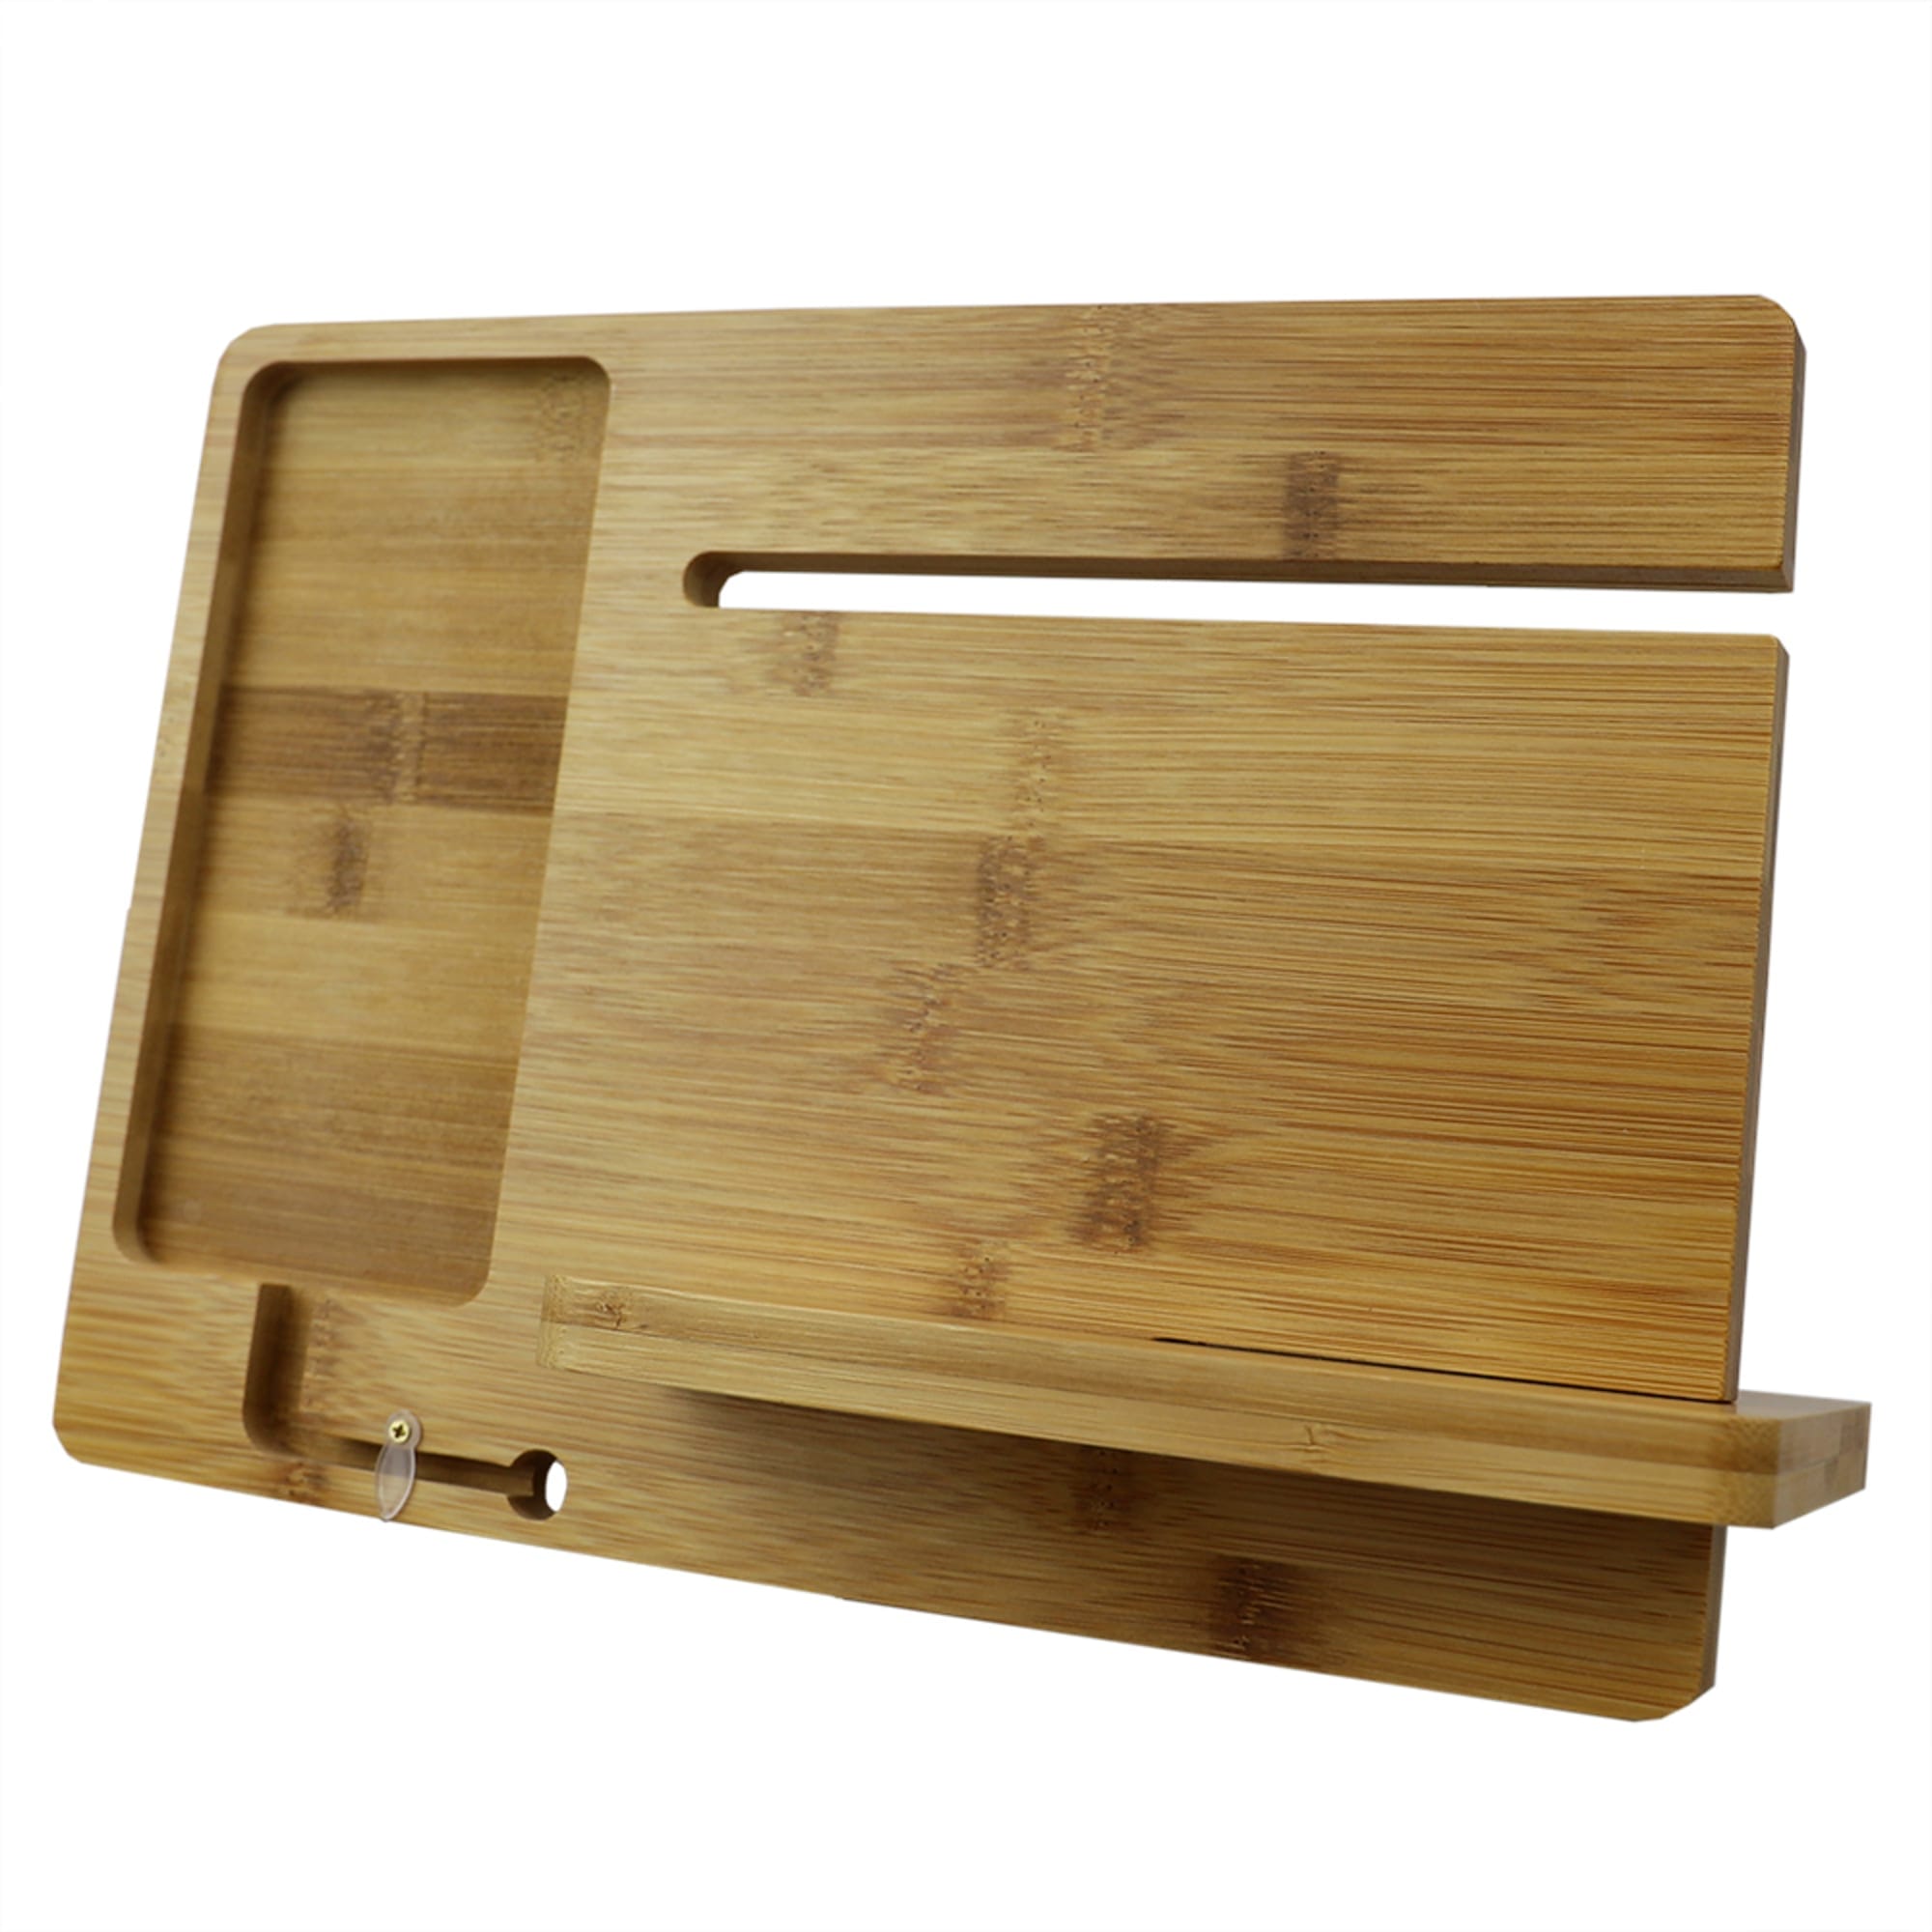 Home Basics Bamboo Smartphone Station, Natural $10.00 EACH, CASE PACK OF 6